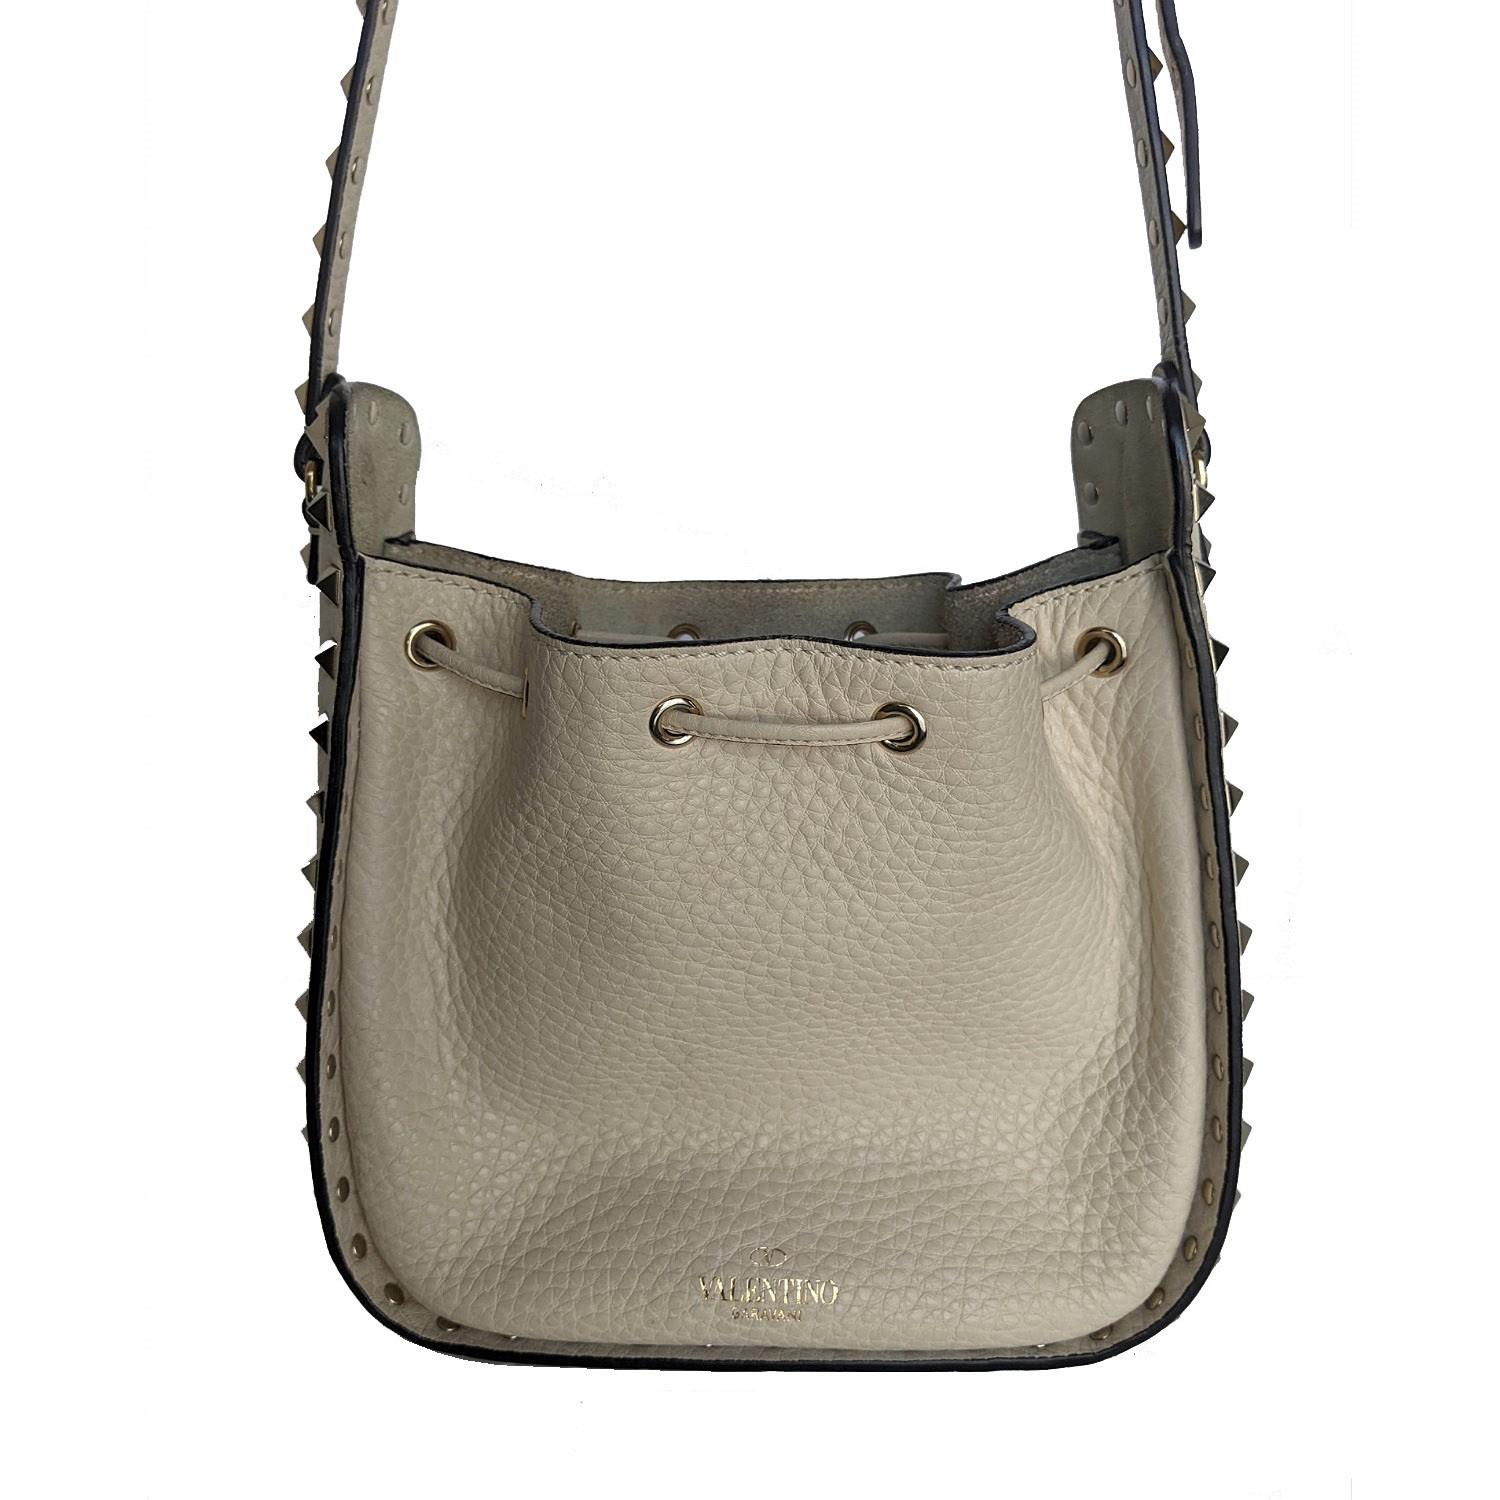 This luxurious bag is crafted of beautifully grained calfskin leather in Ivory with light gold pyramid studs on all borders. The bag features a leather cross body shoulder strap also lined with studs. The shoulder bag opens by a cinch cord to a